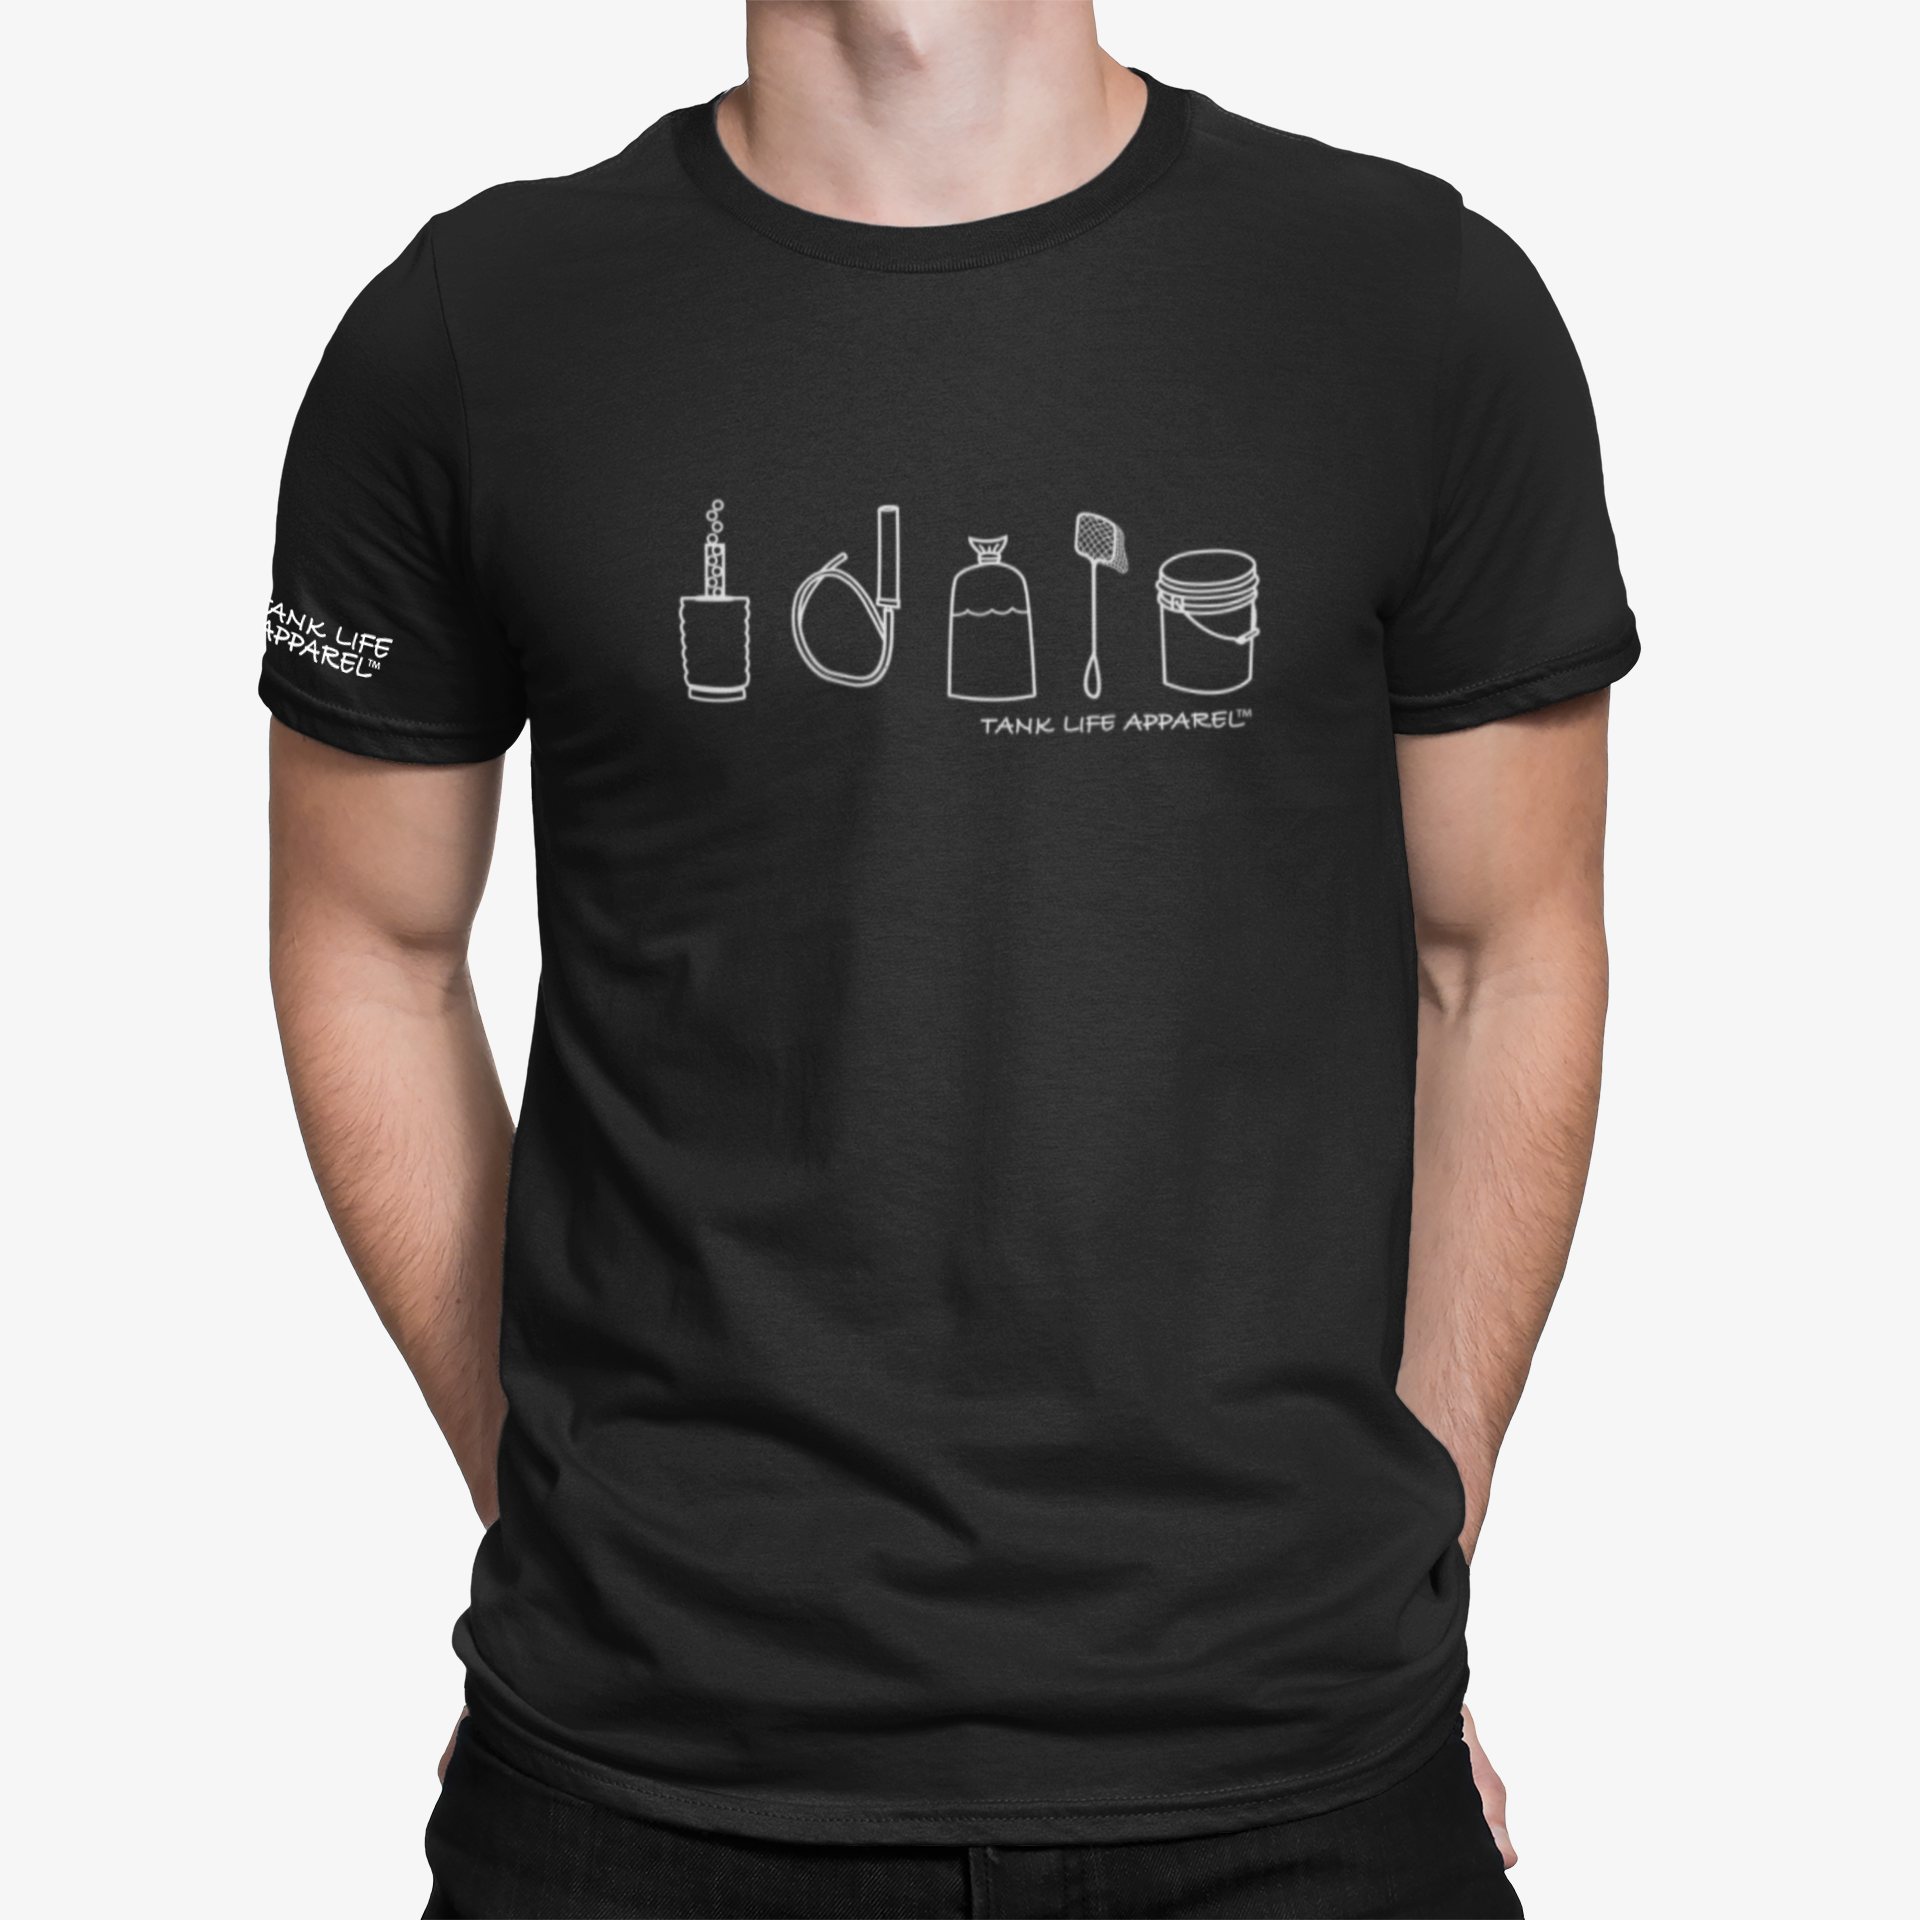 This dri fit athletic shirt design portrays the fishkeeper's lifestyle in a simple white design that depicts a sponge filter, a syphon, a fish bag, a fish net, and a water change bucket.